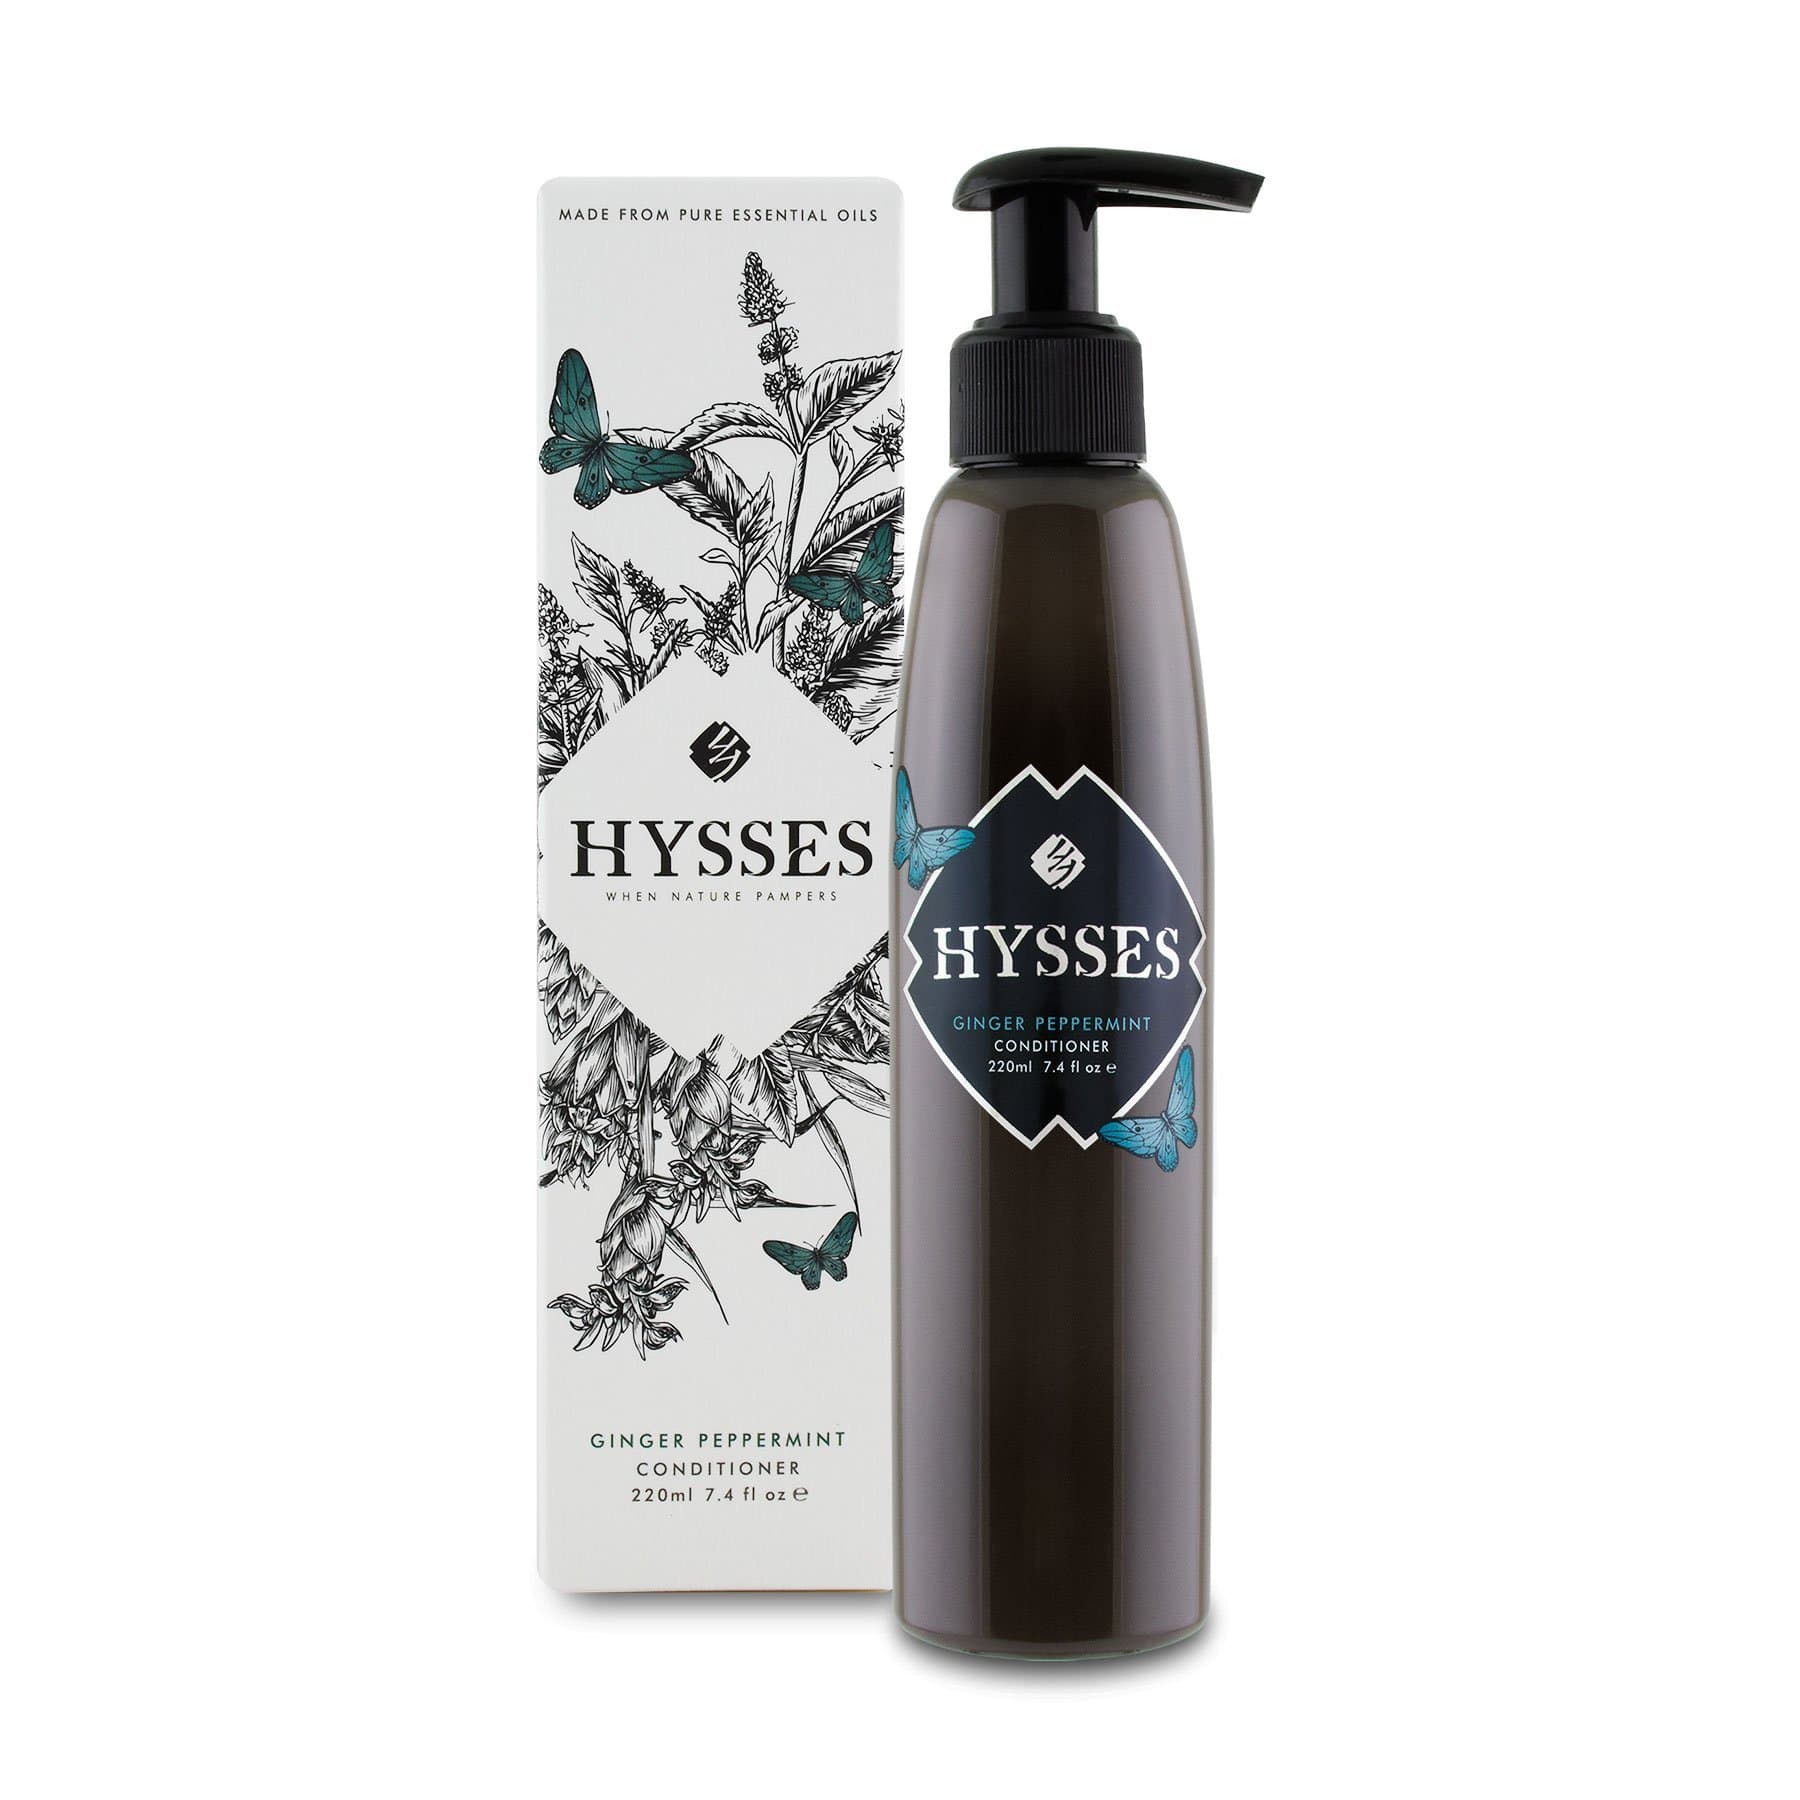 Hysses Hair Care 220ml Conditioner Ginger Peppermint